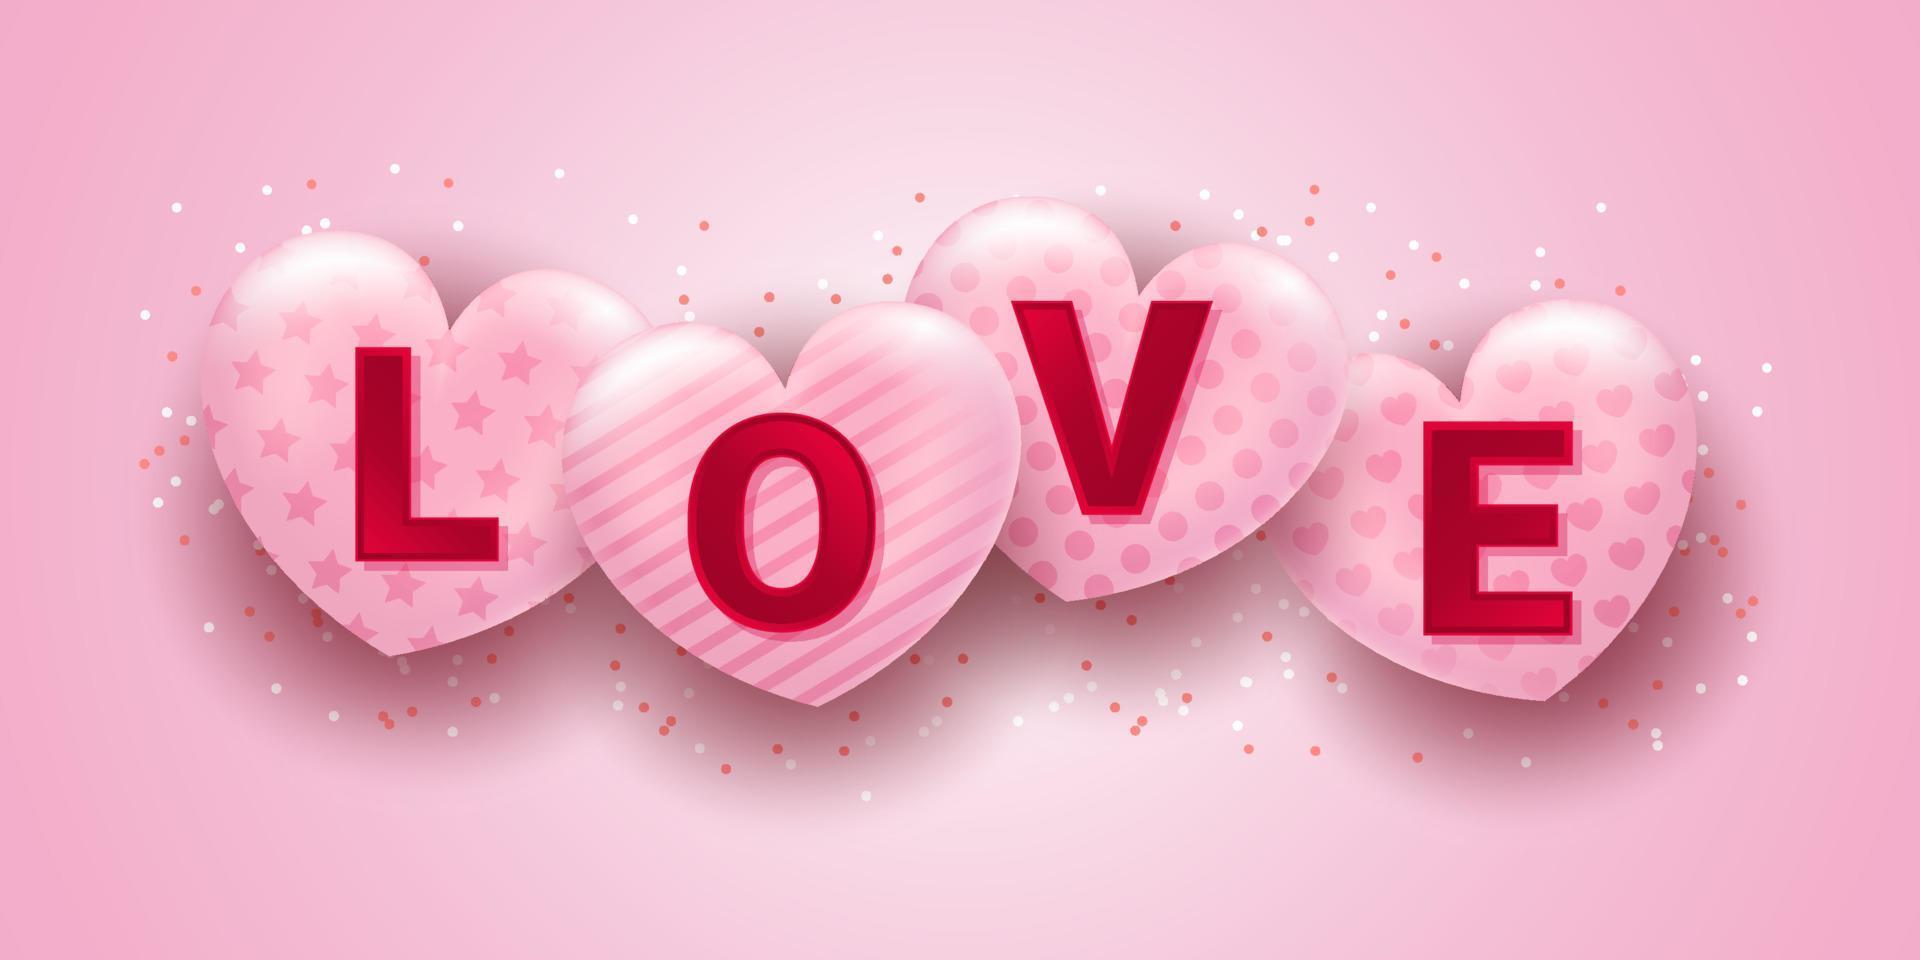 Love text on heart template for, background, sale, banner, poster, cover design, social media feed, stories. Happy Valentines Day greeting concept vector